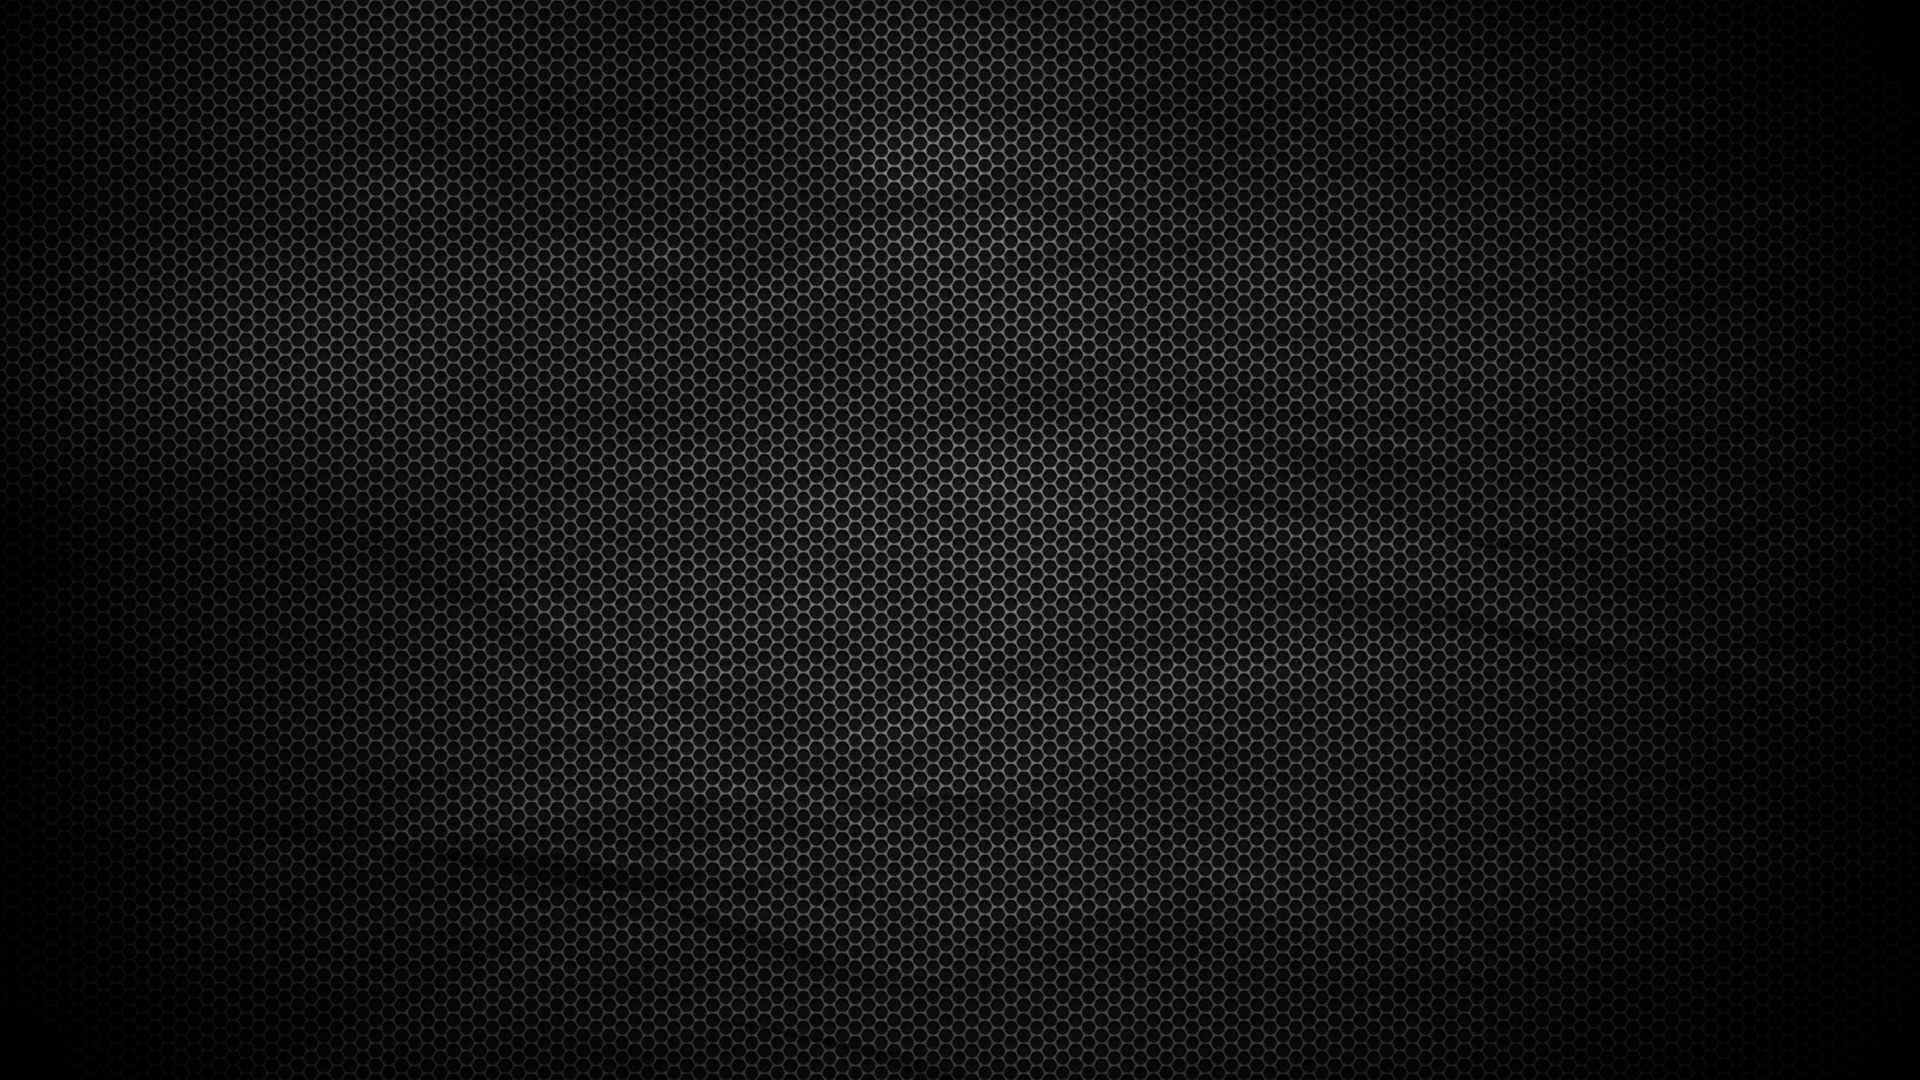 Wallpaper, dark, text, pattern, texture, circle, lines, brand, background, shape, design, line, darkness, circles, screenshot, computer wallpaper, black and white, monochrome photography, font, size 1920x1080